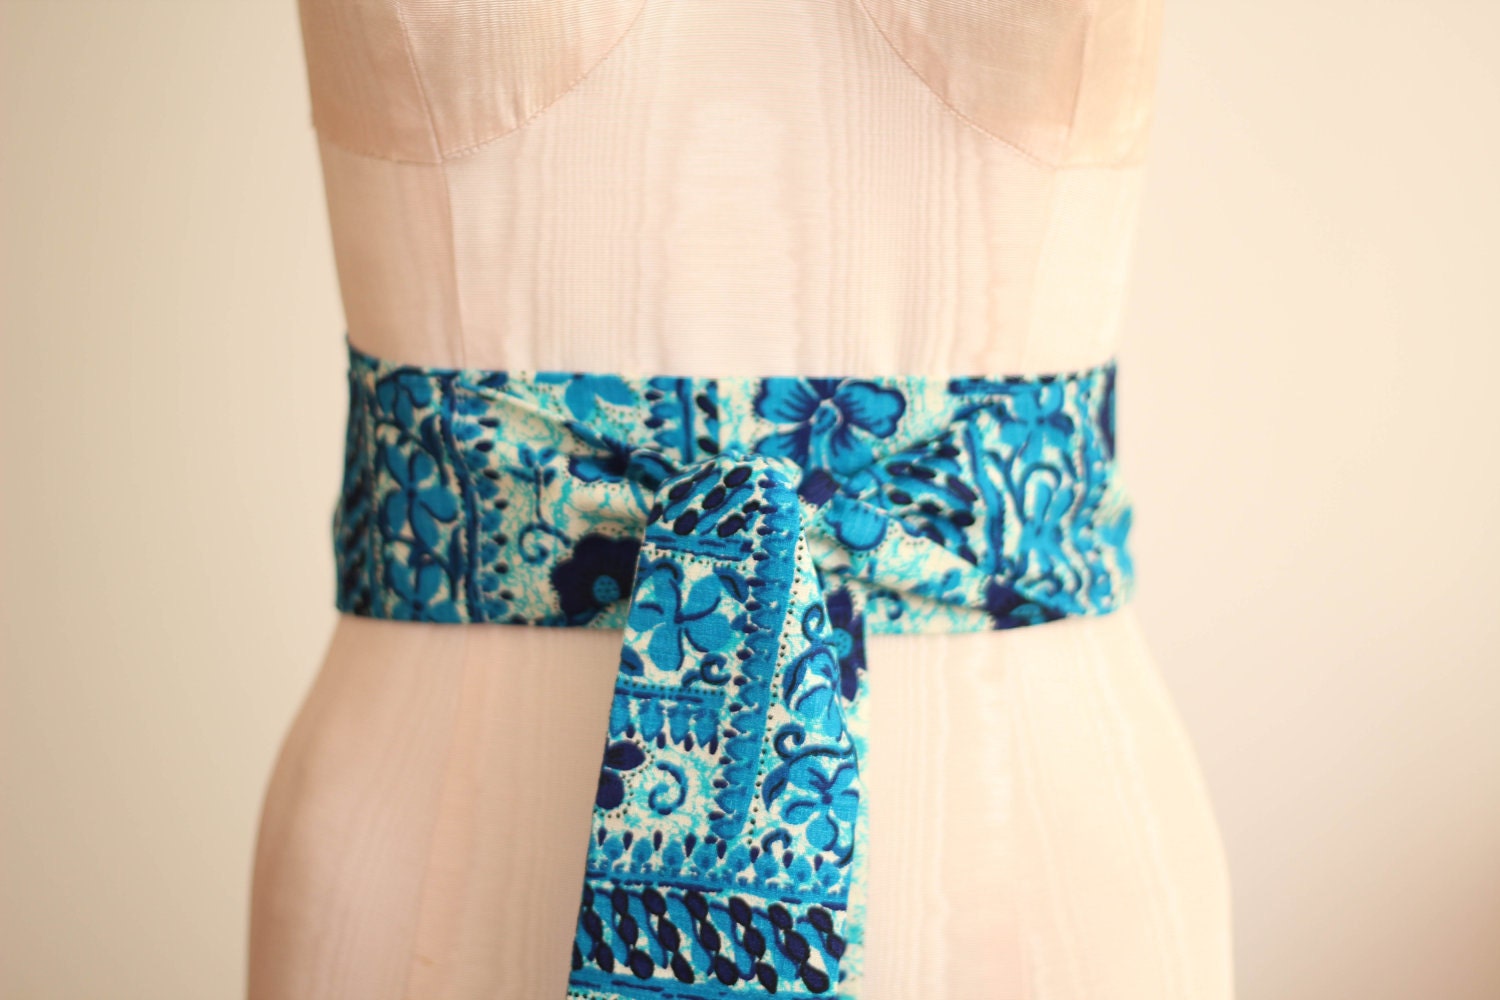 Obi Belt in Turquoise, Teal, Blue and Cream Hawaiian Hibiscus Flower Print Vintage Cotton Fabric - ready to ship - last one - ccdoodle